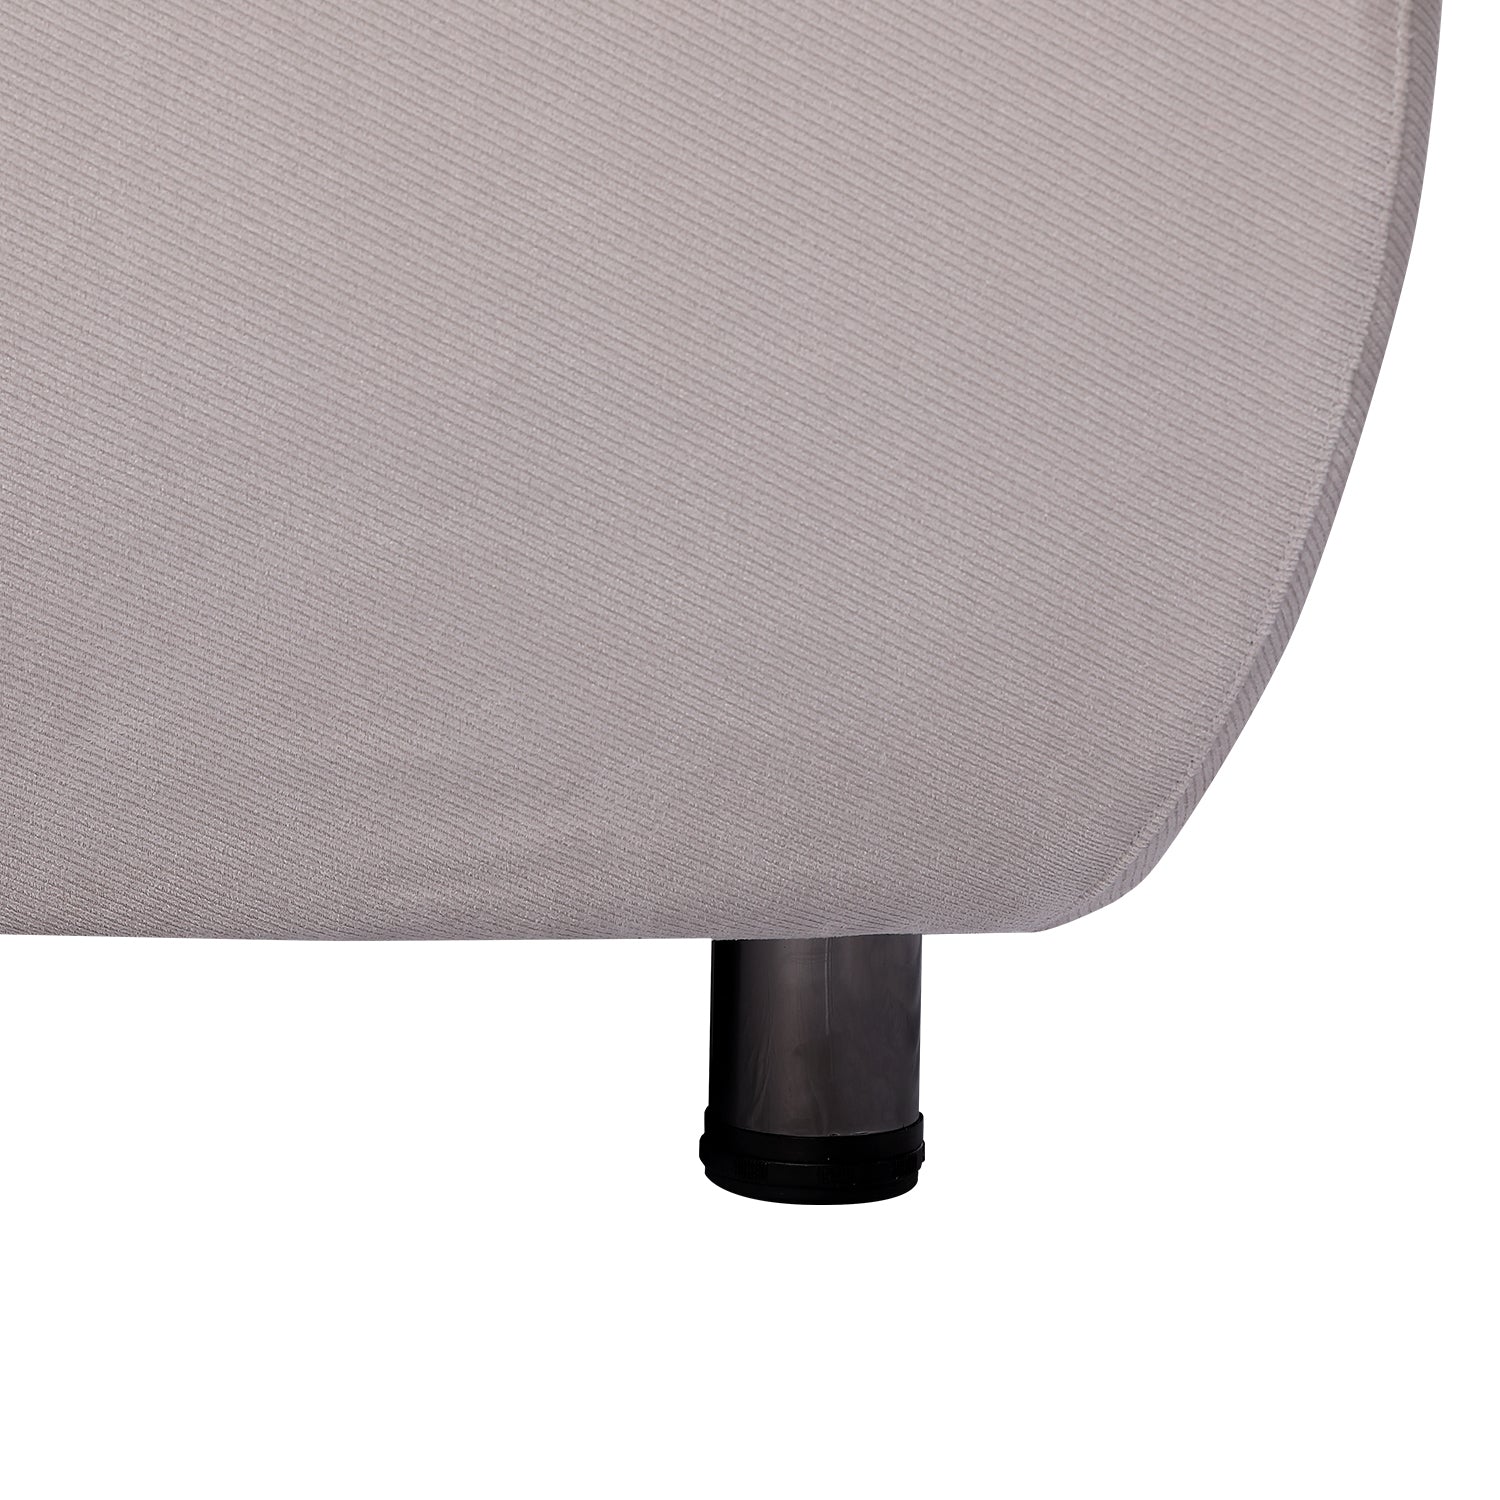 Close-up of bed frame leg, featuring light grey fabric and black cylindrical leg support. Modern minimalist design.